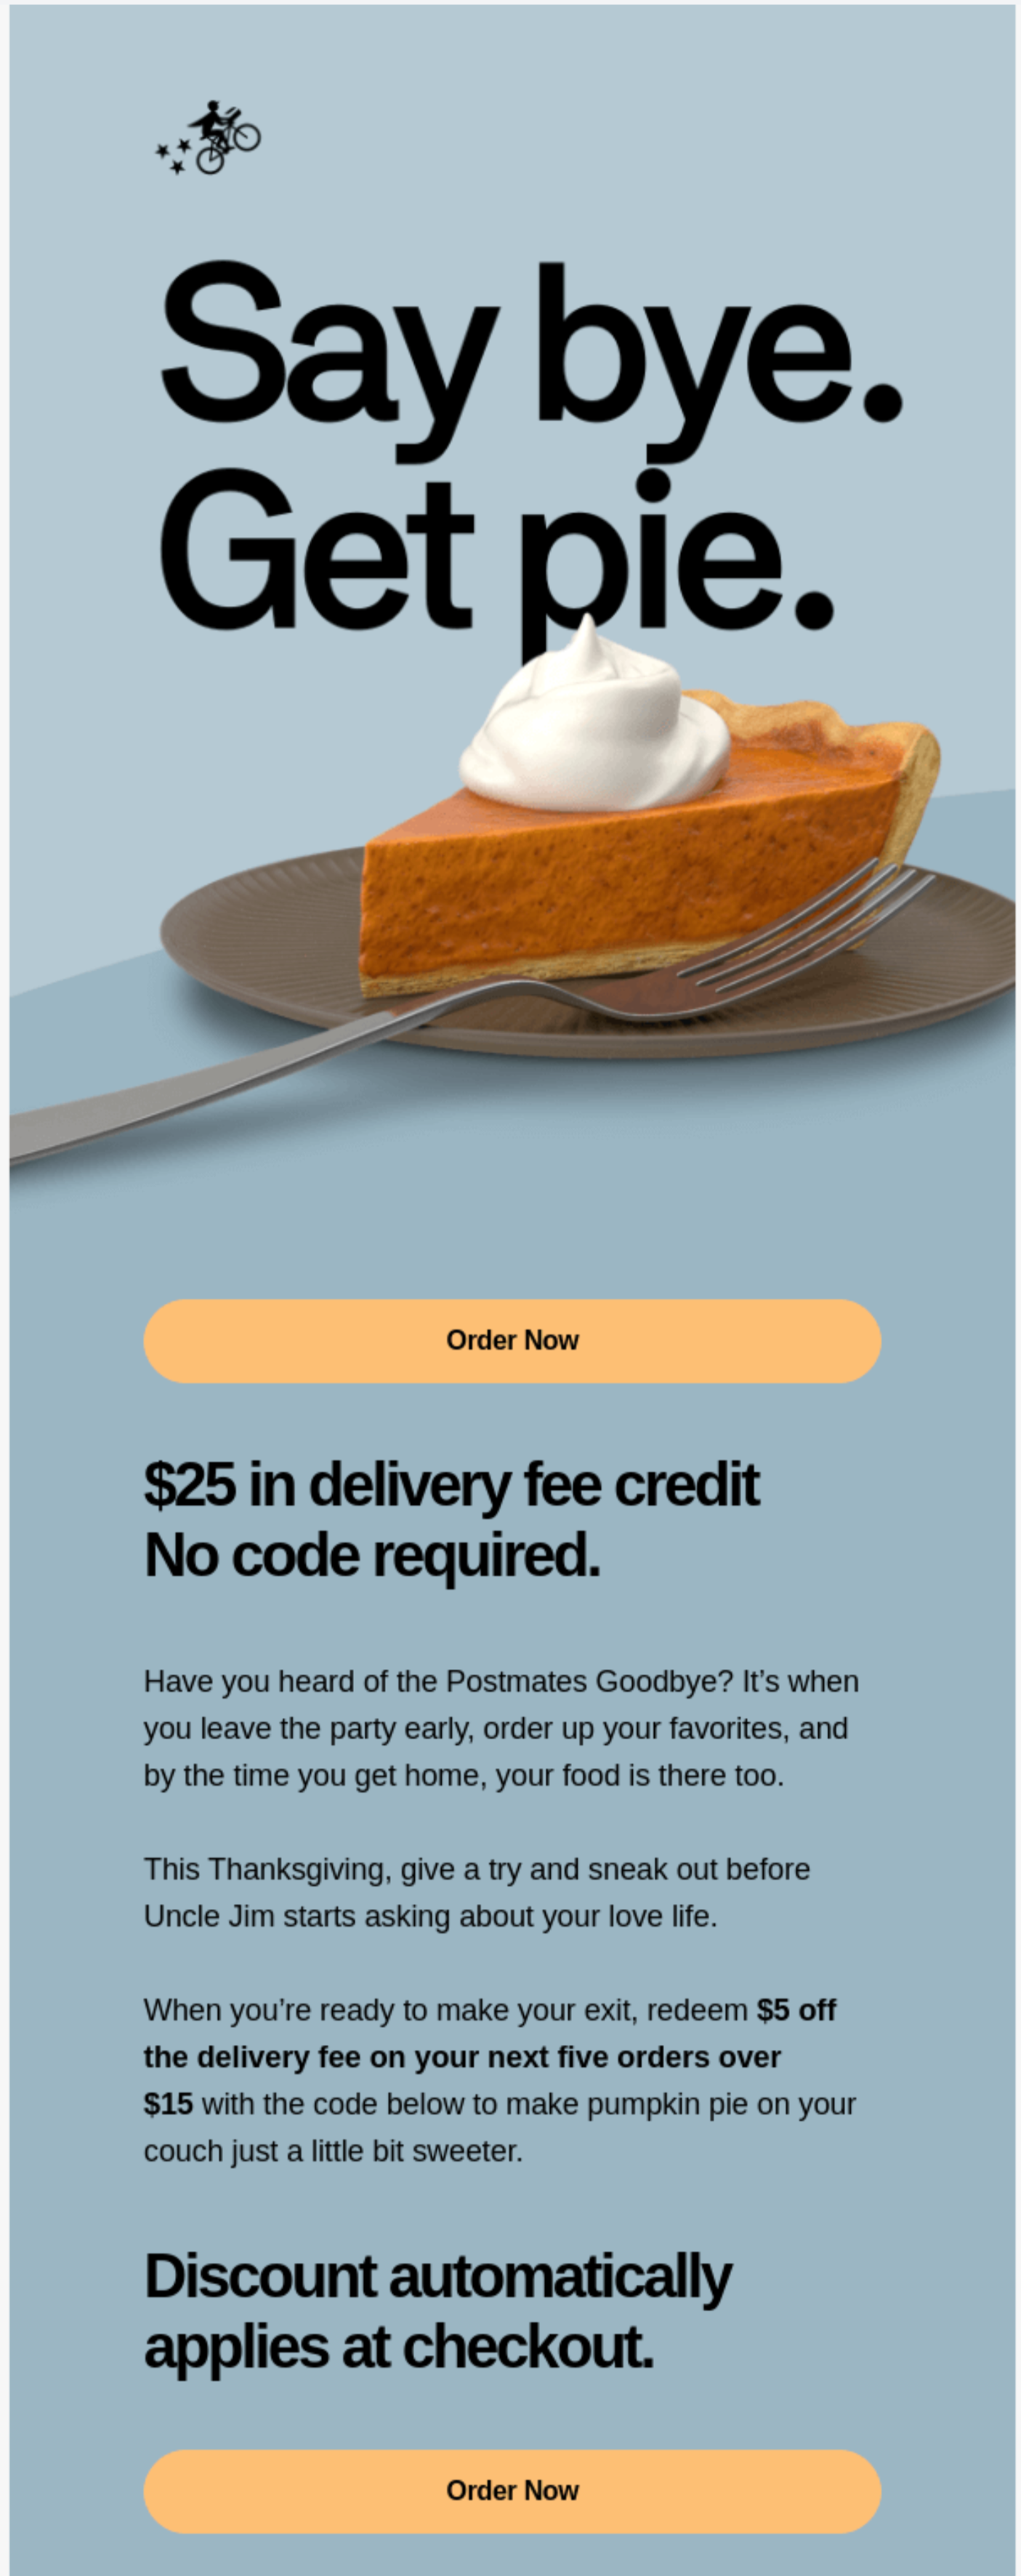 Postmates reduces friction by automatically applying coupon